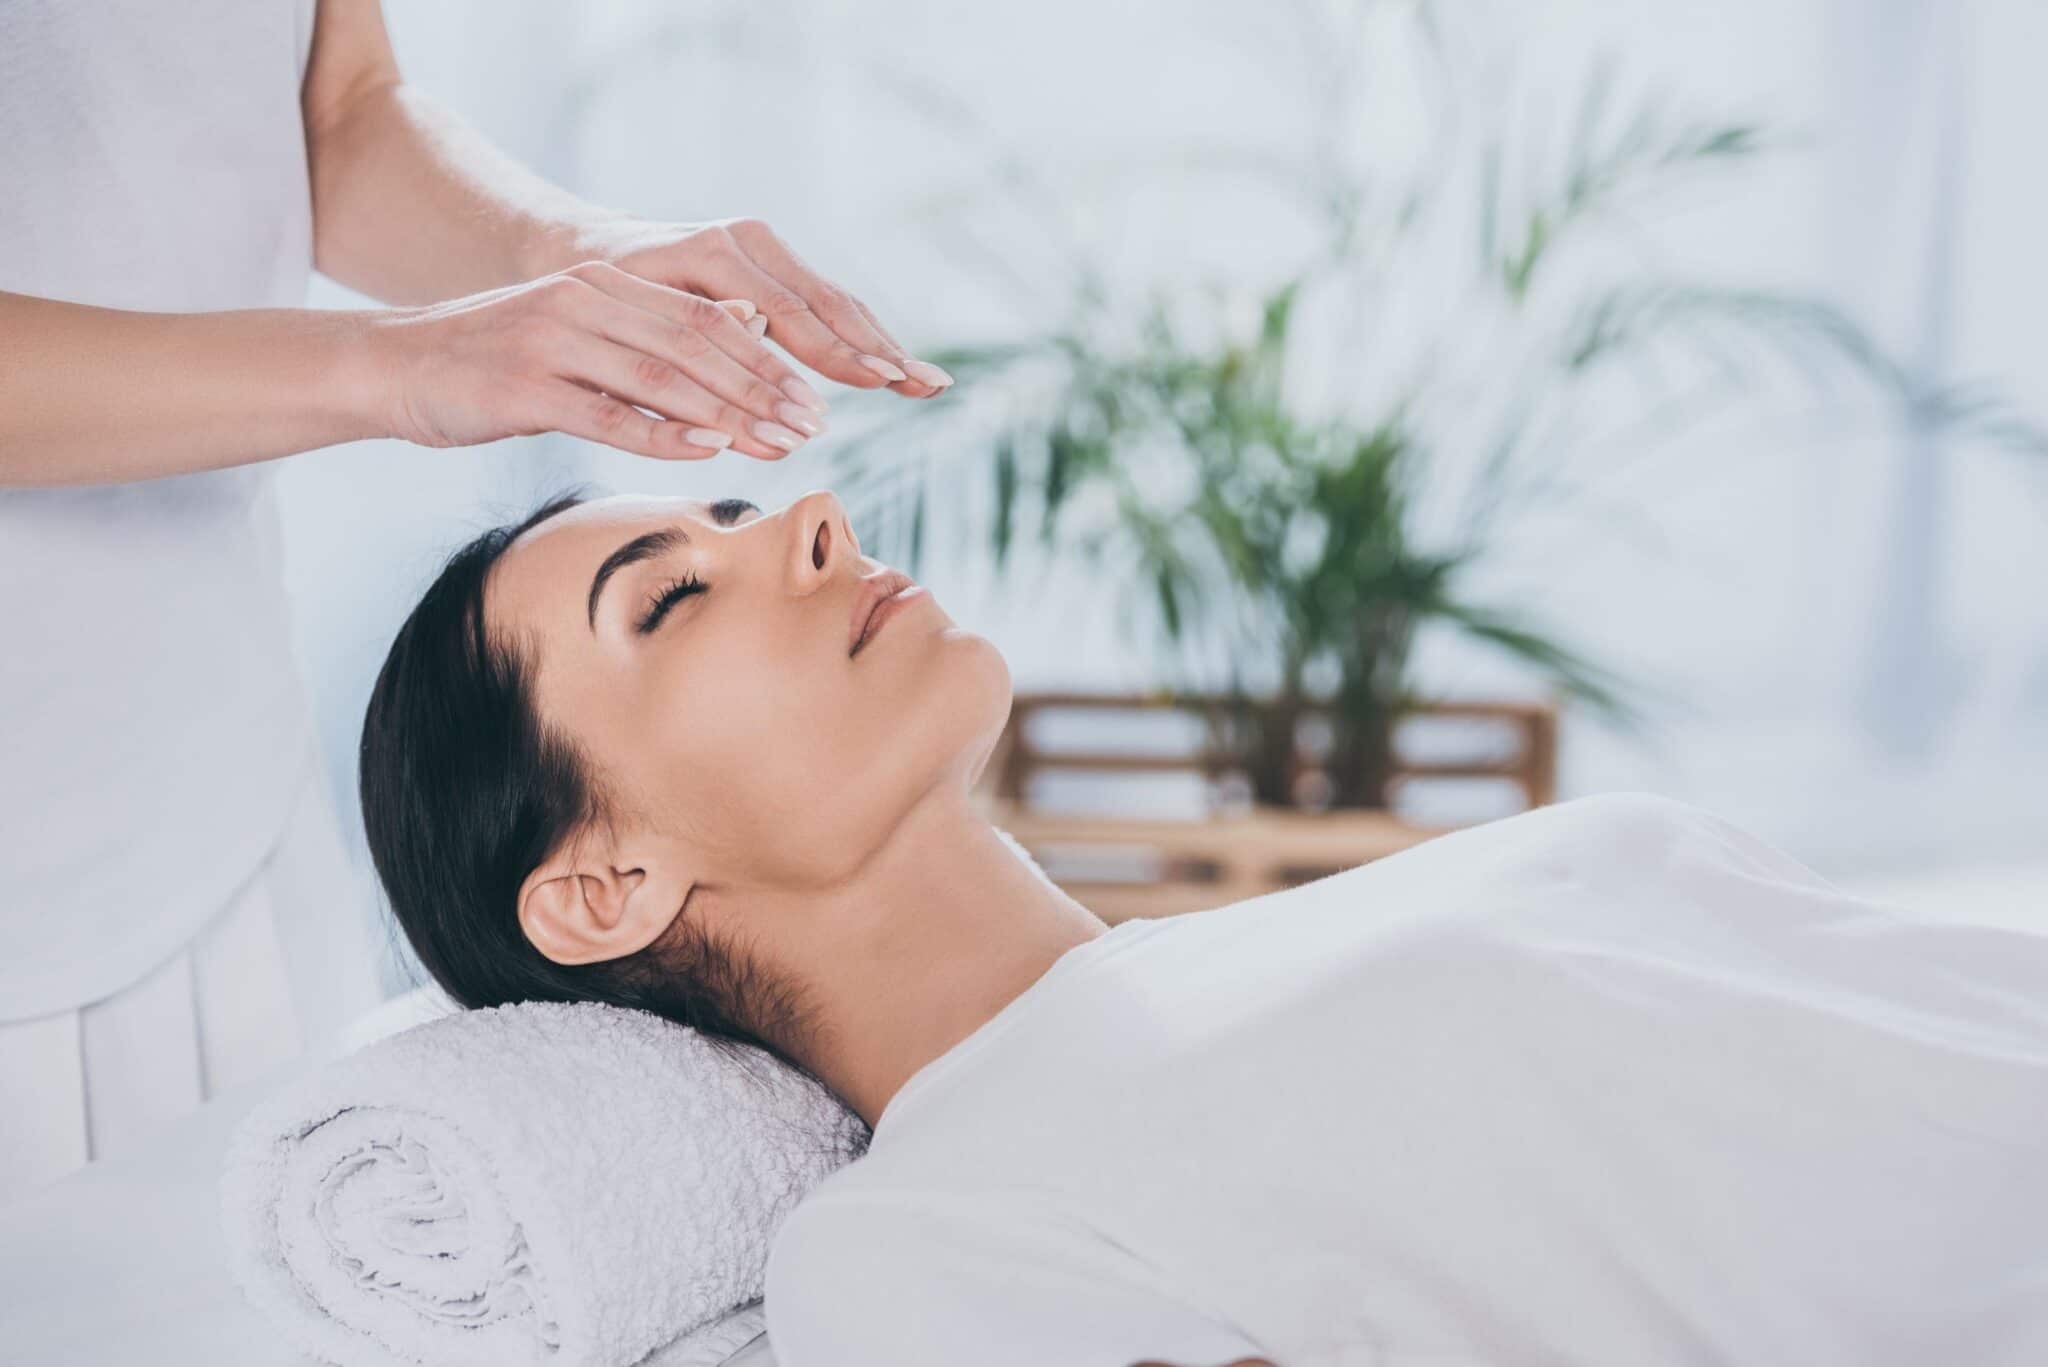 What is reiki and can it help relieve stress